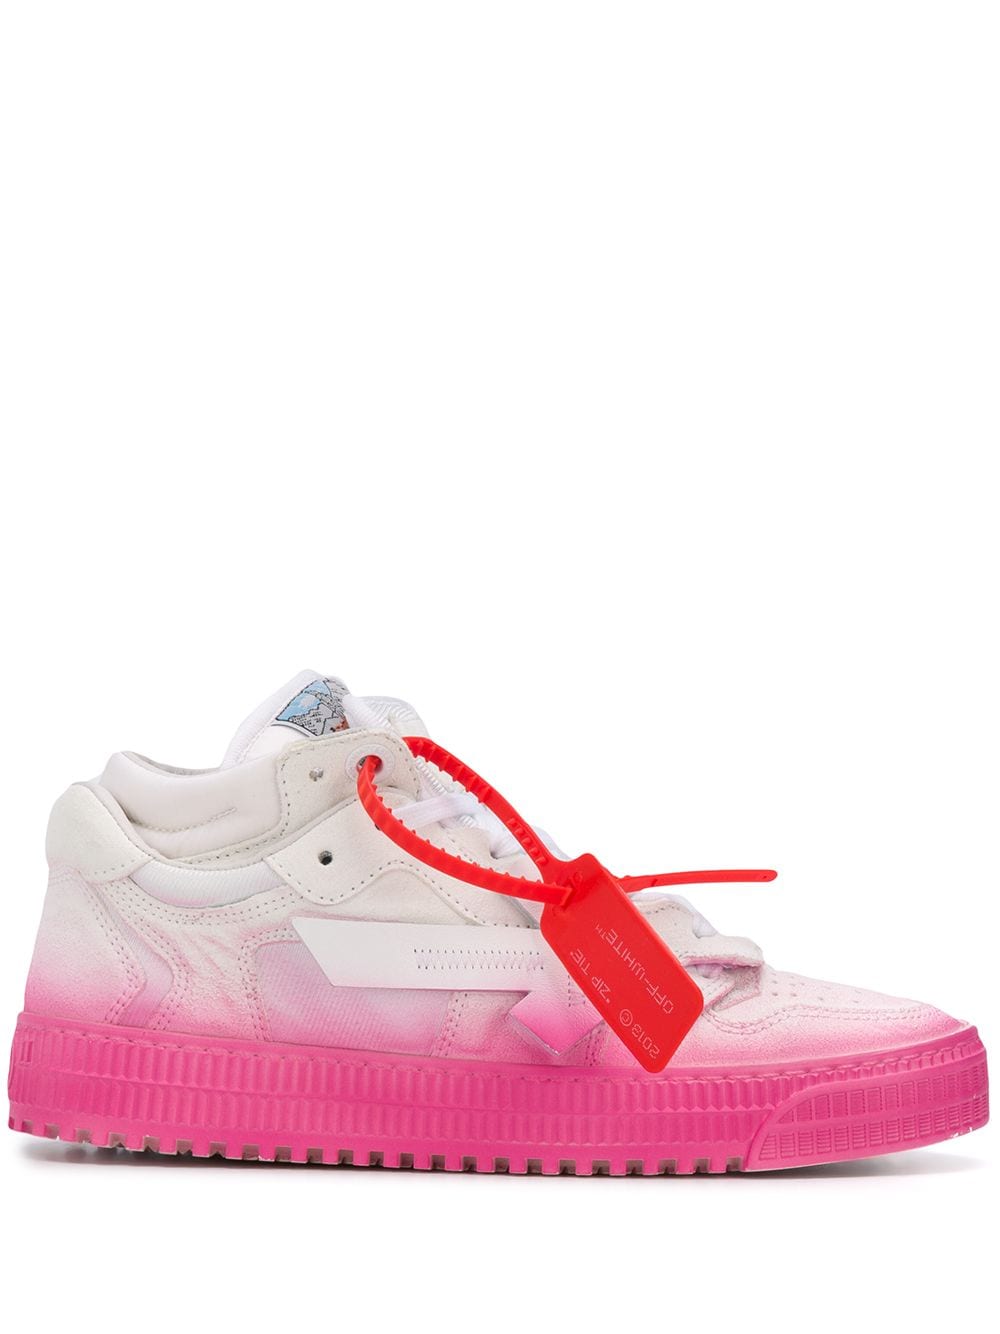 off white pink sneakers